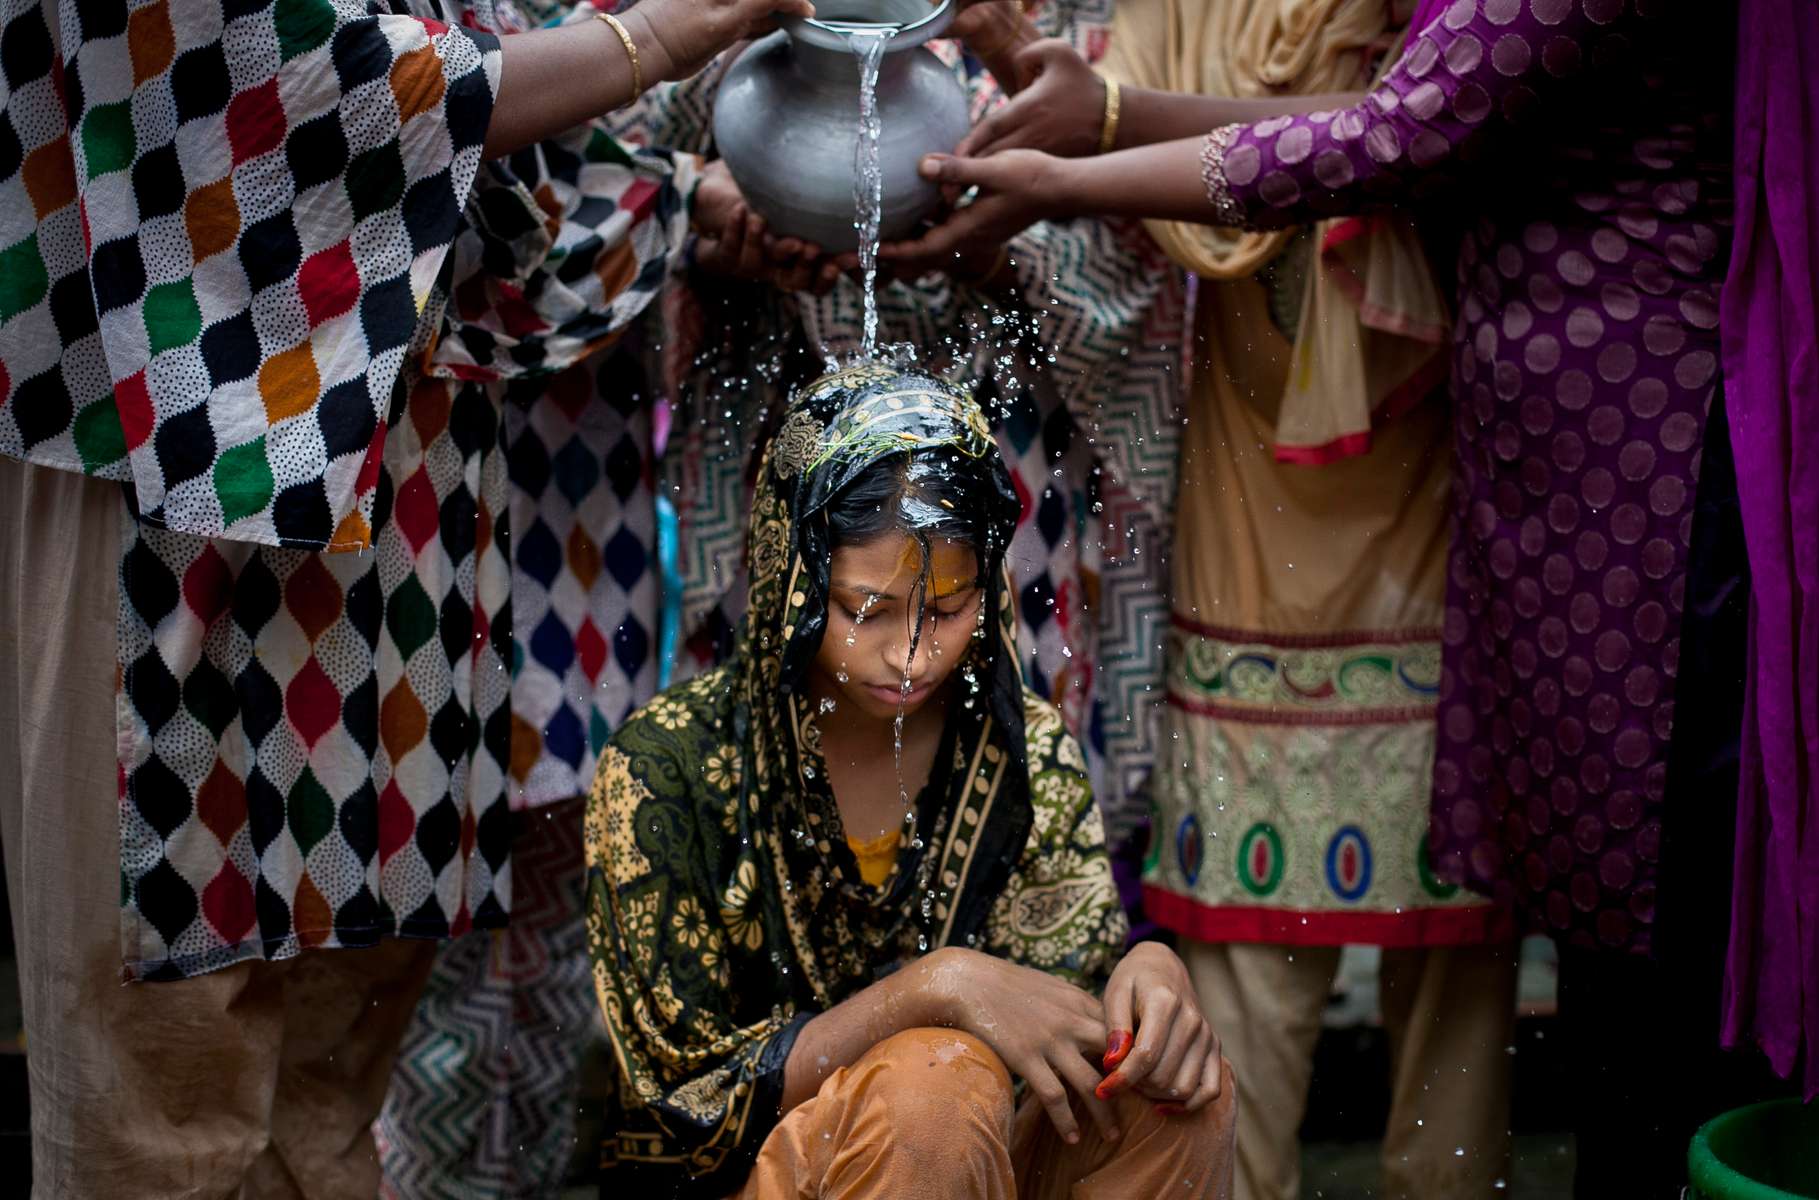 5 year old Nasoin Akhter is bathed on the day of her wedding to a 32 year old man in Manikganj, Bangladesh.